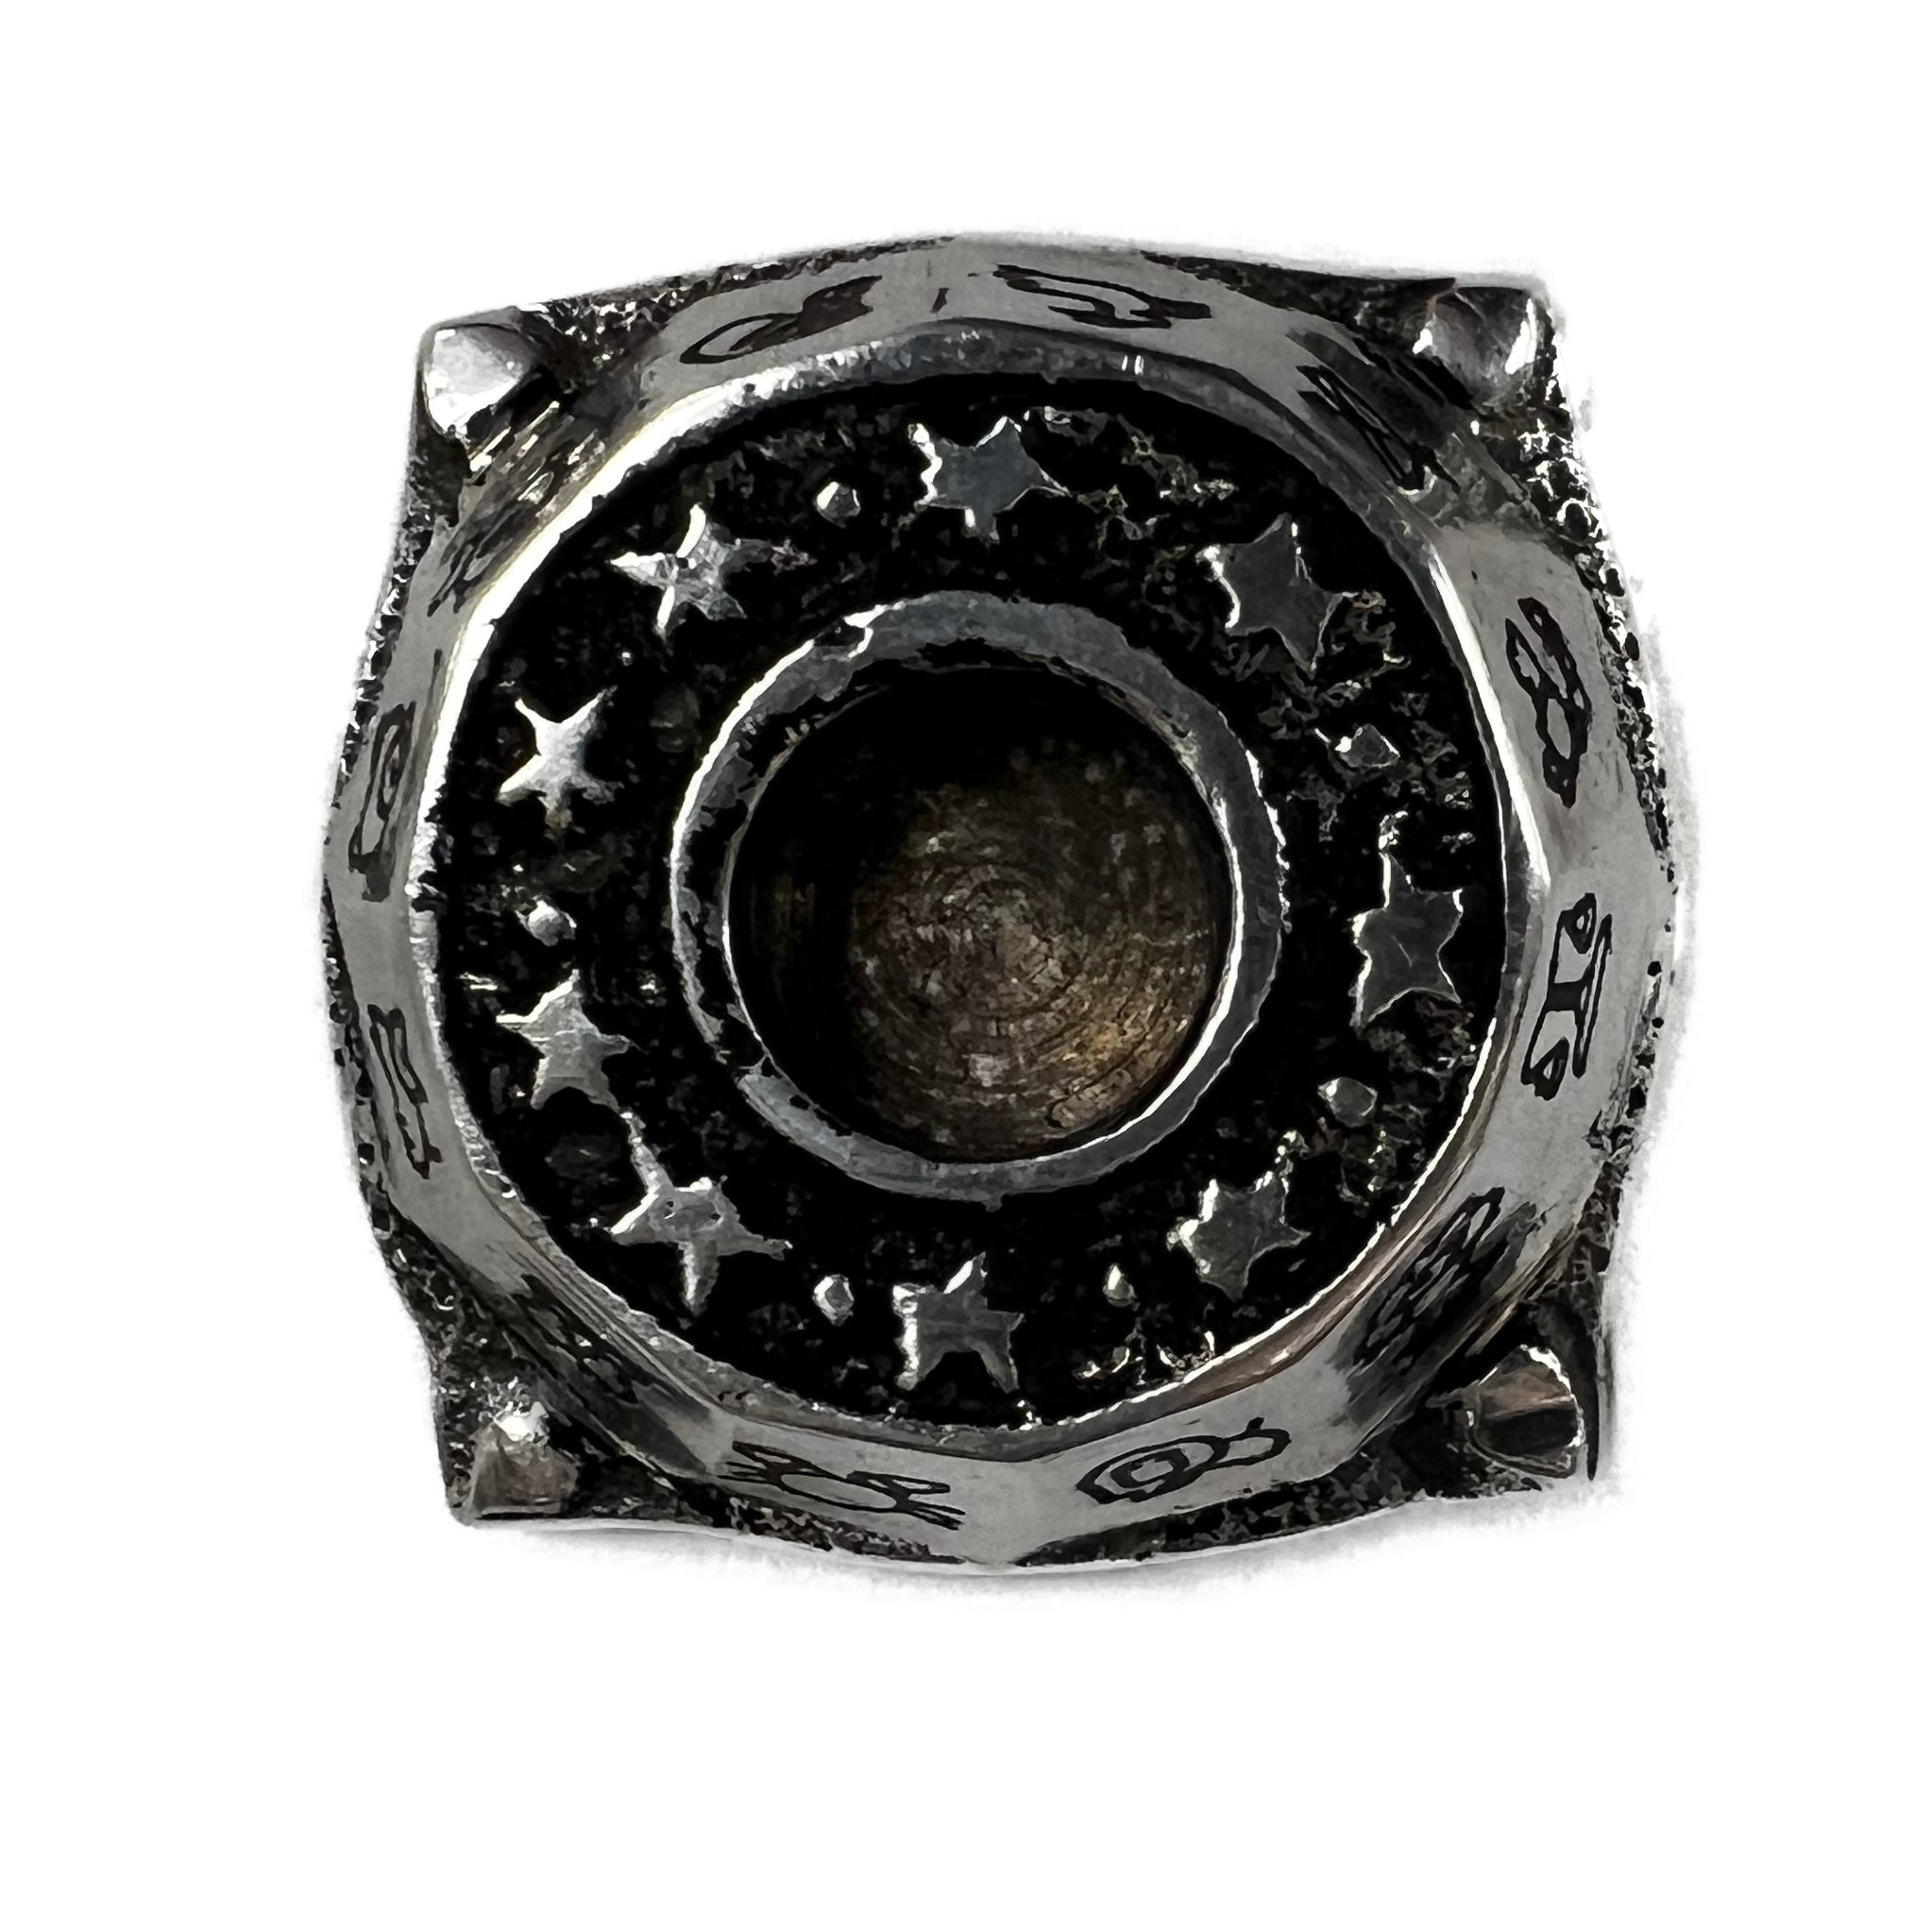 top of candle holder with stars surrounding the hole 